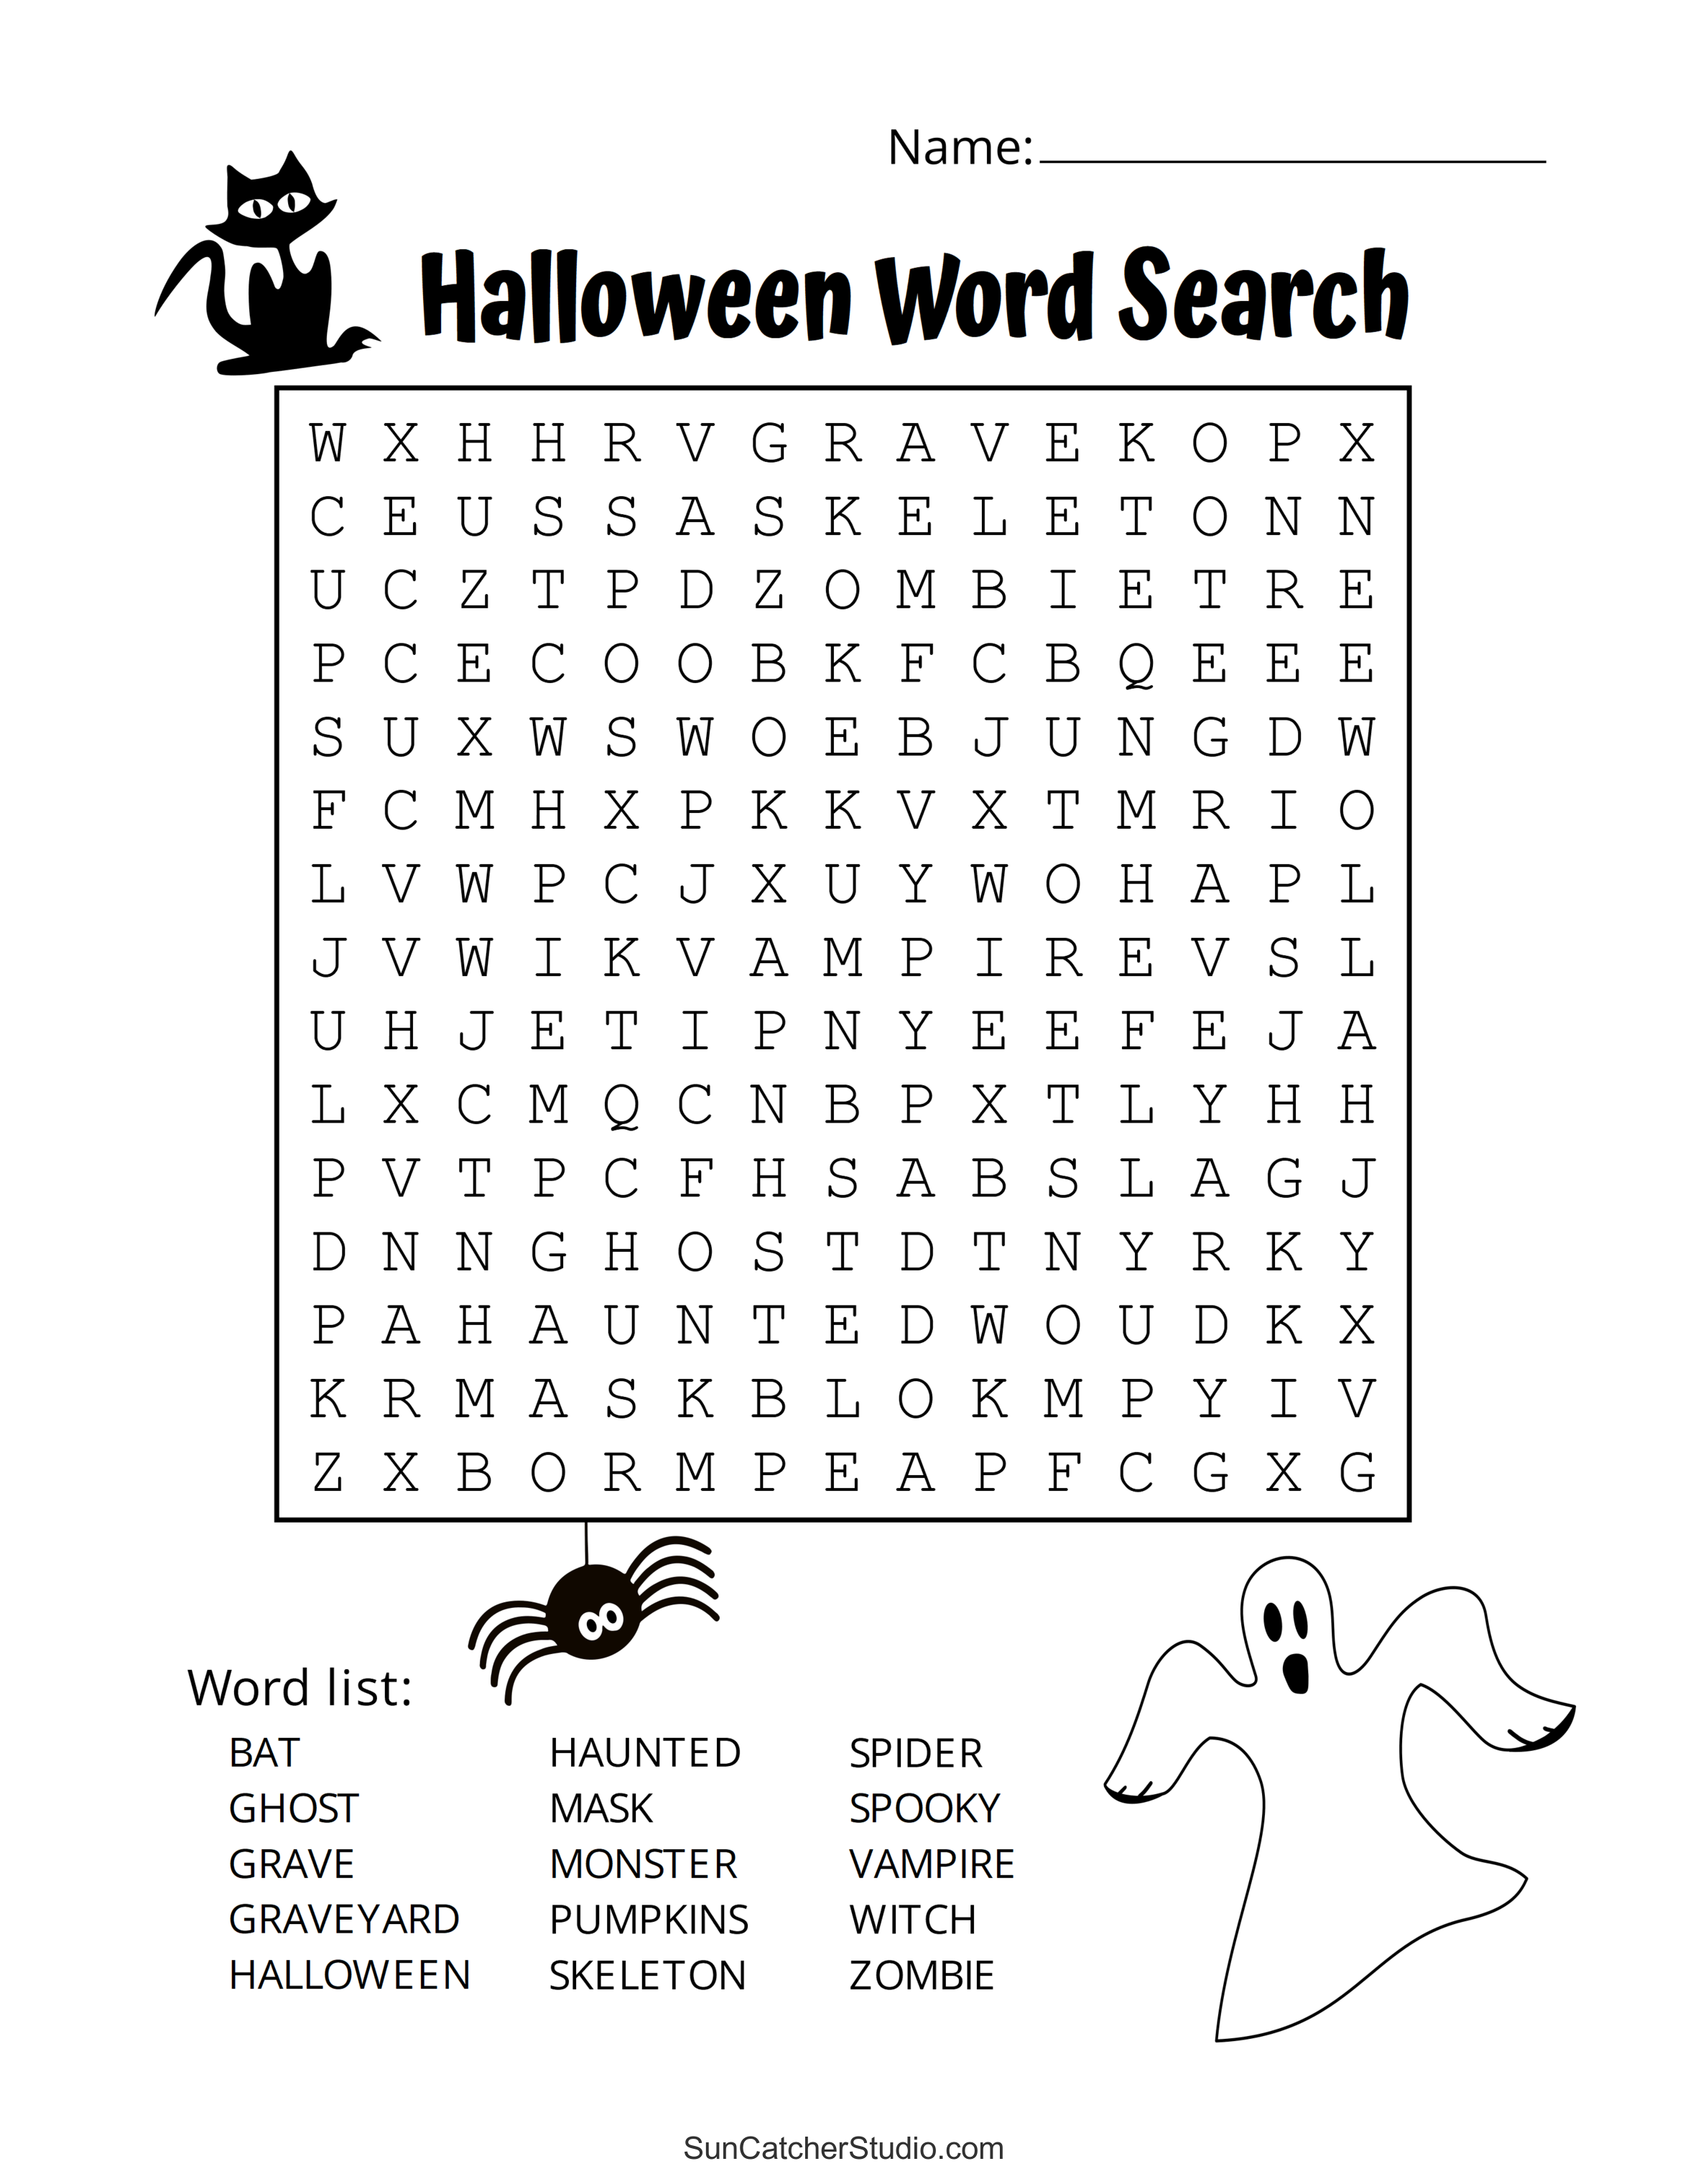 Halloween Word Search (Free Printable Puzzles) DIY Projects Patterns